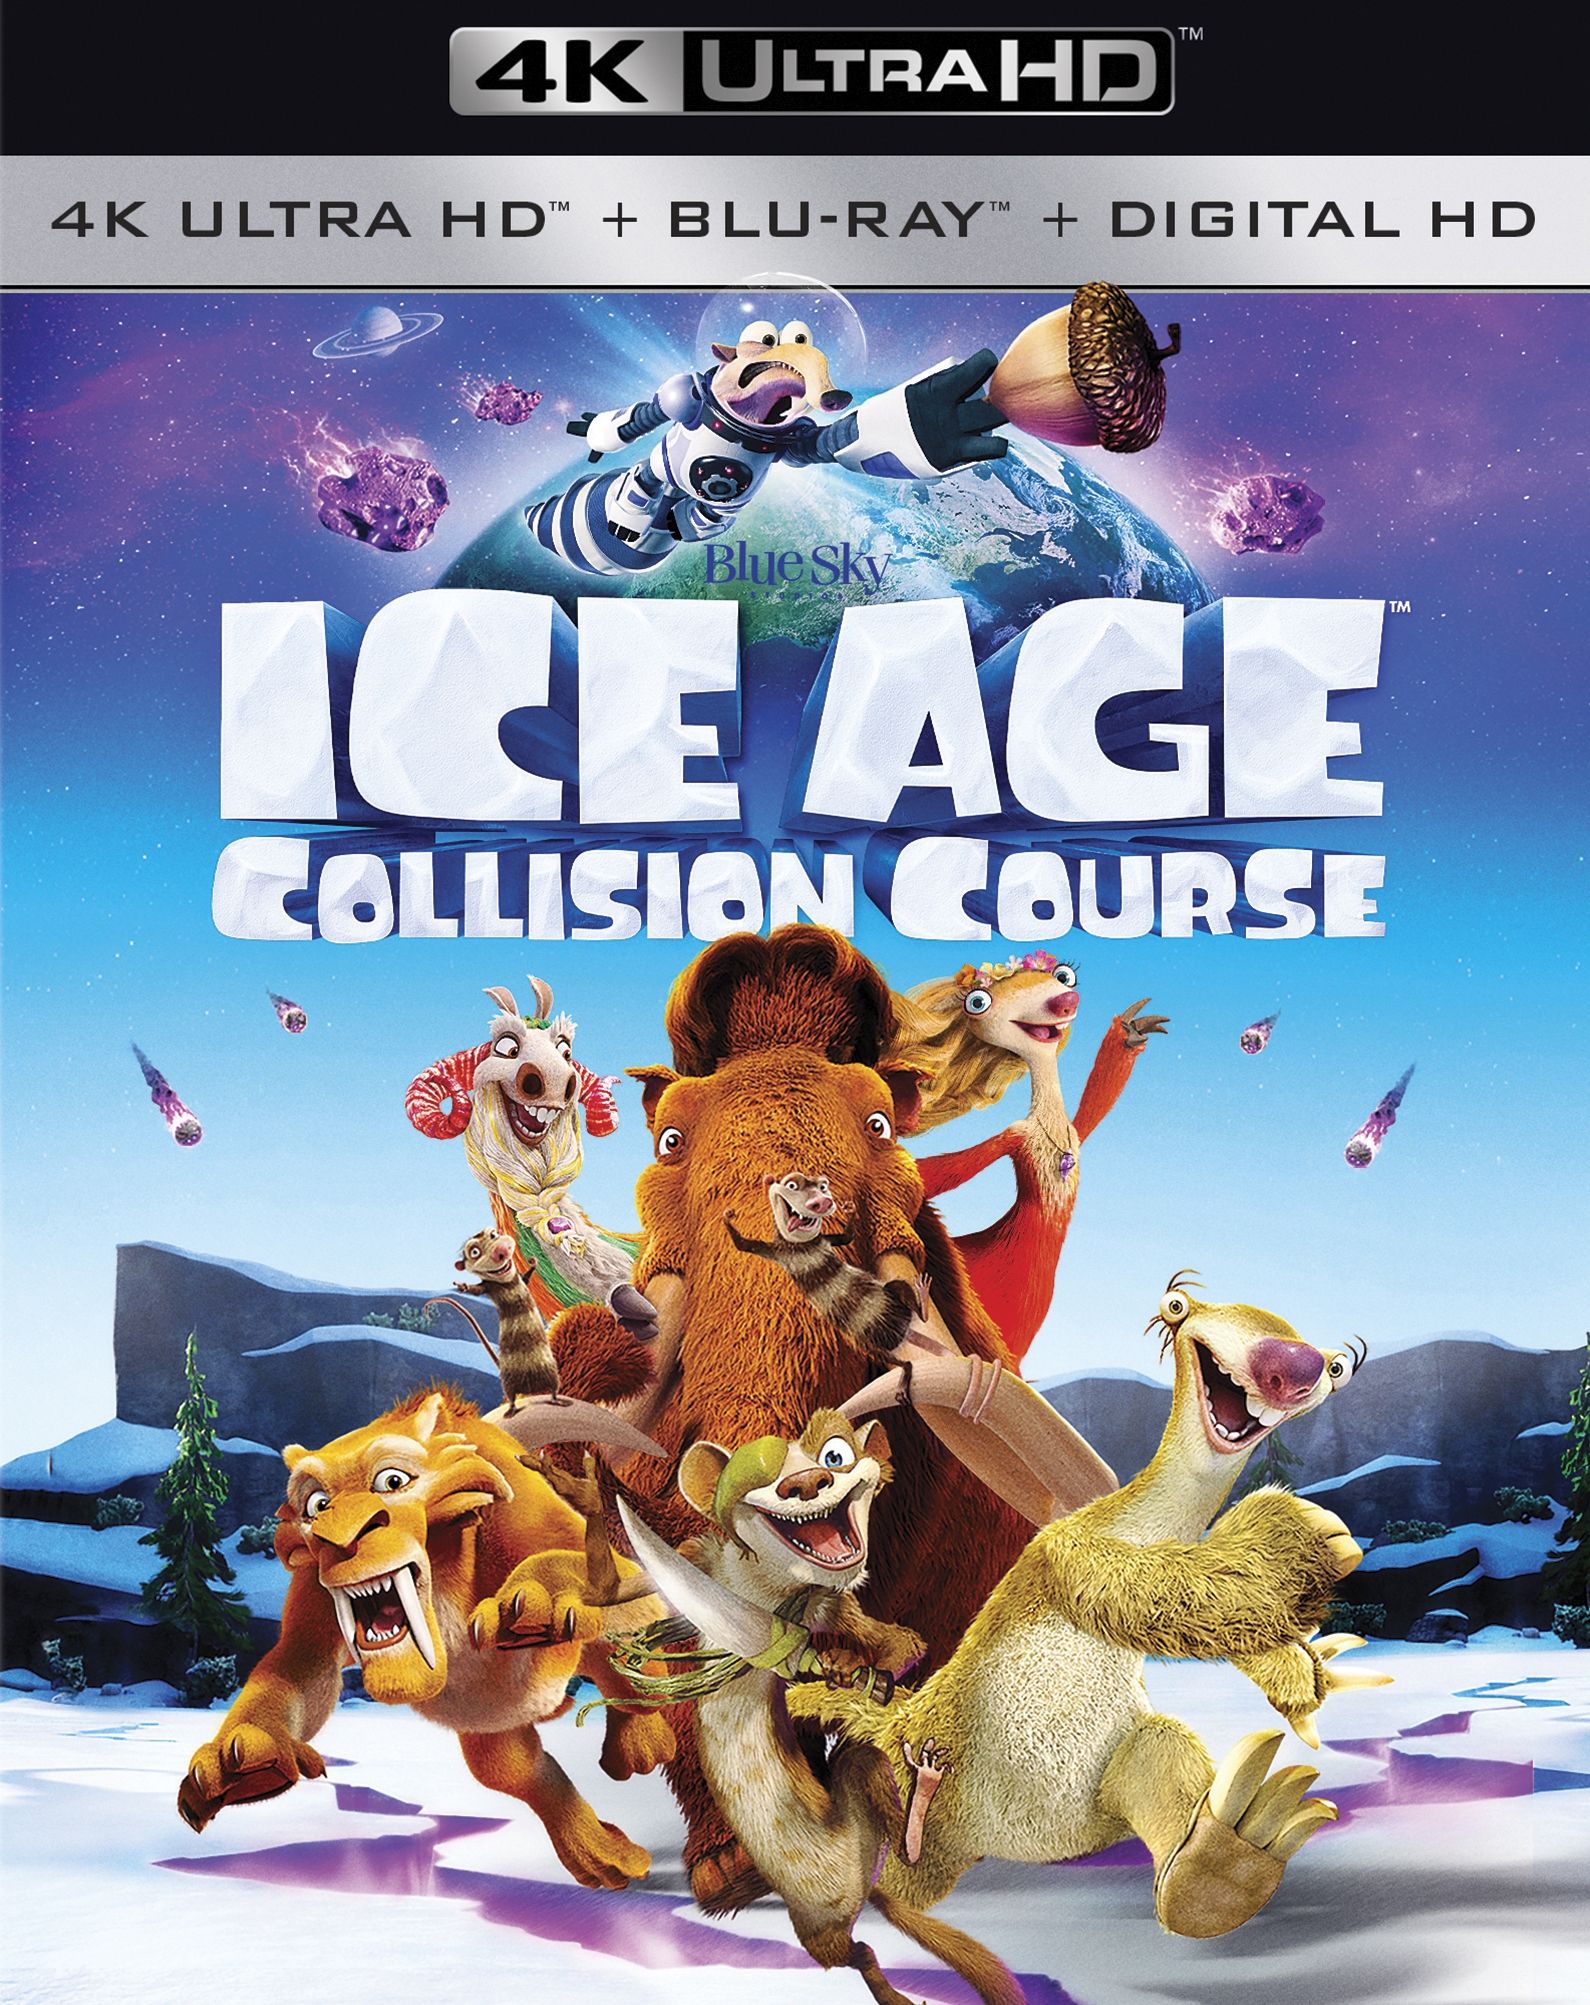 Ice Age: Collision Course 2016 (4K ULTRA HD + BLURAY)